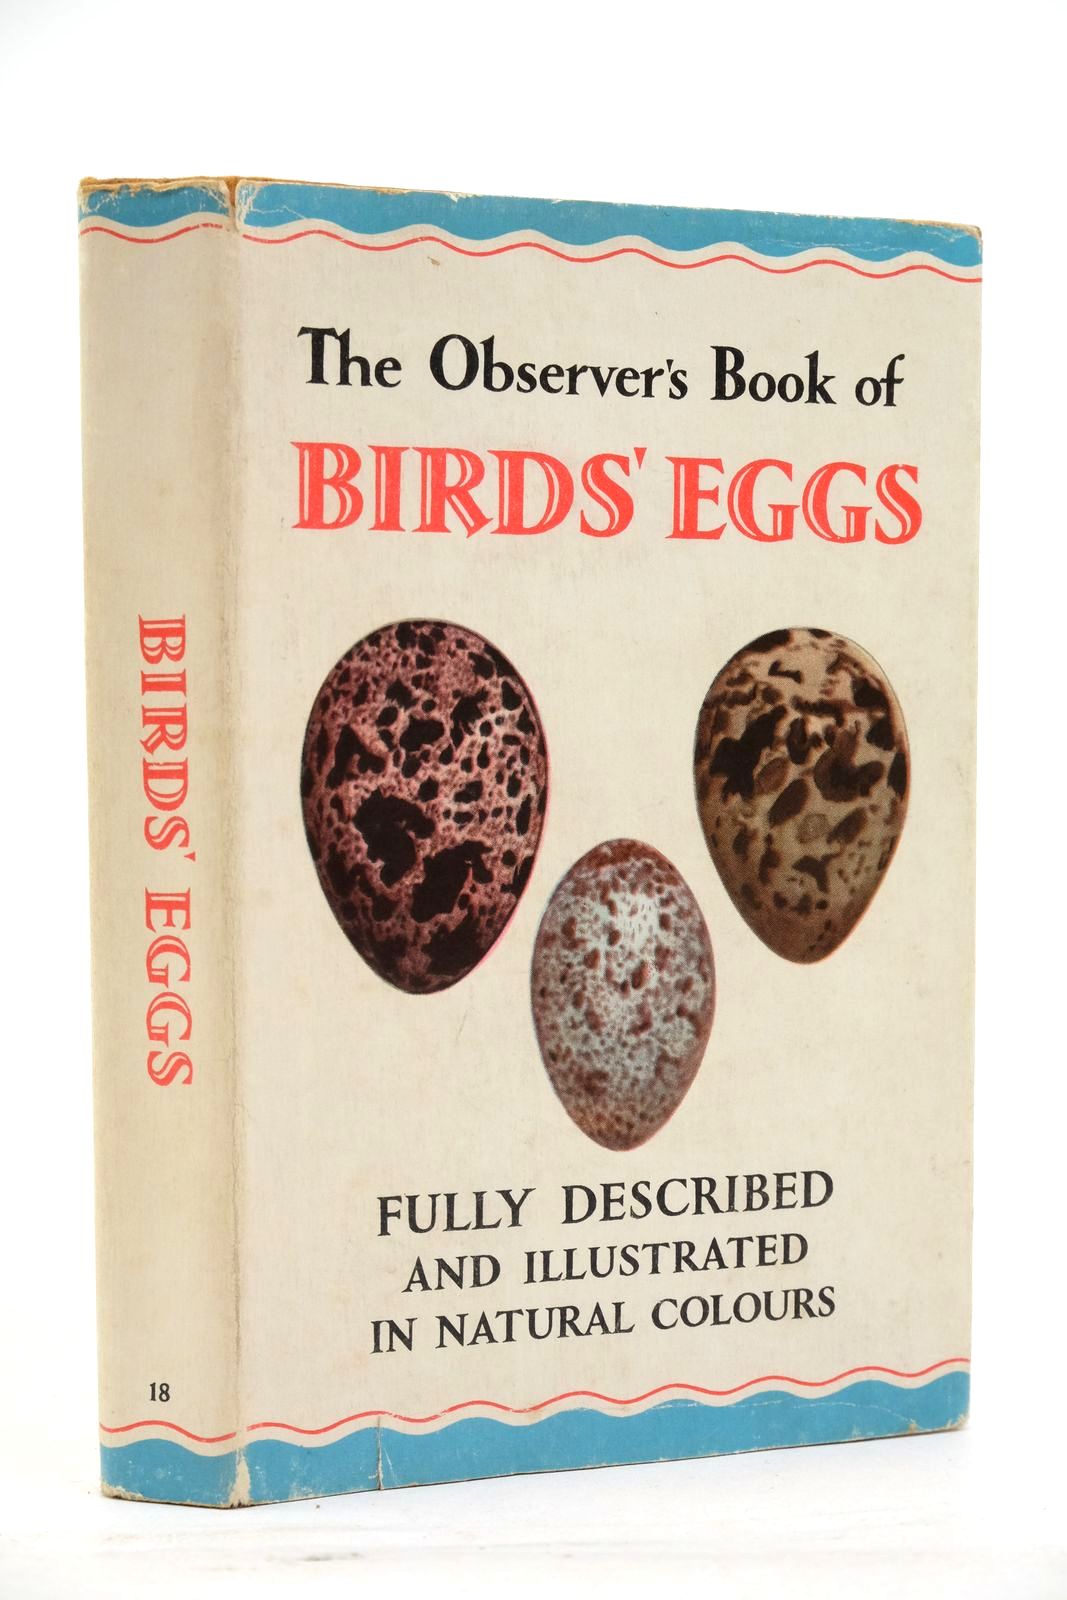 Photo of THE OBSERVER'S BOOK OF BIRDS' EGGS written by Evans, G. illustrated by Swain, H.D. published by Frederick Warne &amp; Co Ltd. (STOCK CODE: 2137978)  for sale by Stella & Rose's Books